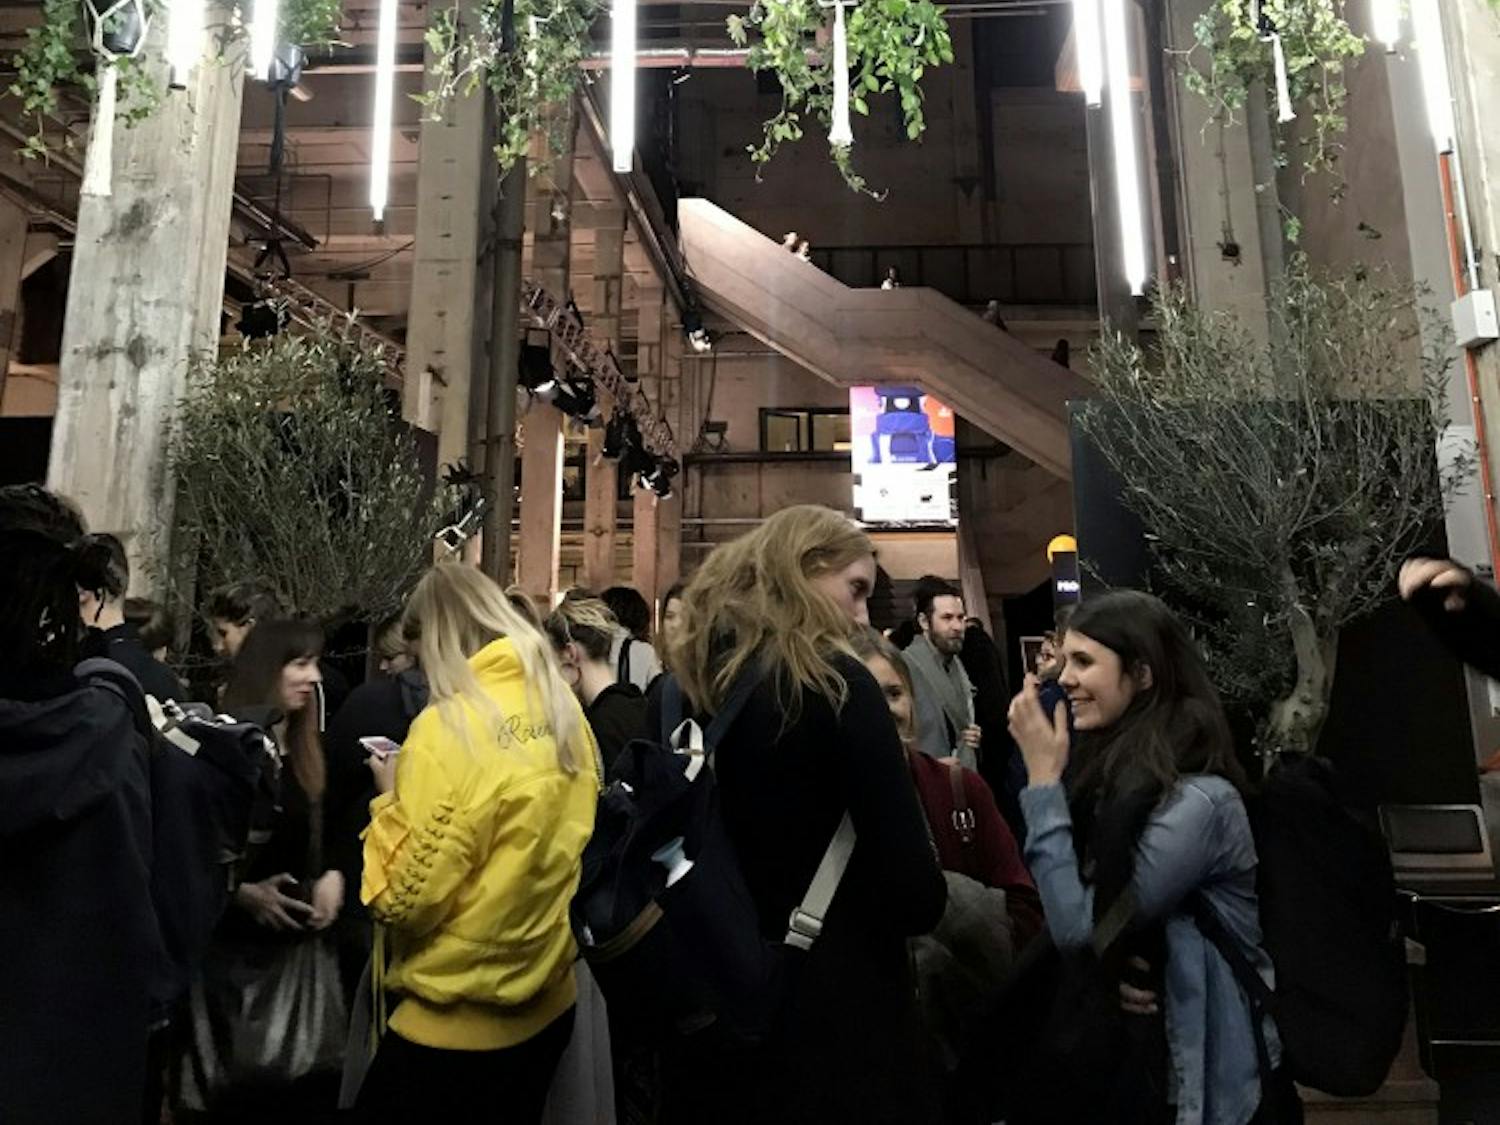 The third annual&nbsp;Ethical Fashion Show Berlin took place Jan. 16-18 at the former Kraftwerk power plant, now a vibrant and energetic venue for exhibits and events. It involved over 120 vendors and a catwalk finale with 25 models wearing the hottest ethical styles.